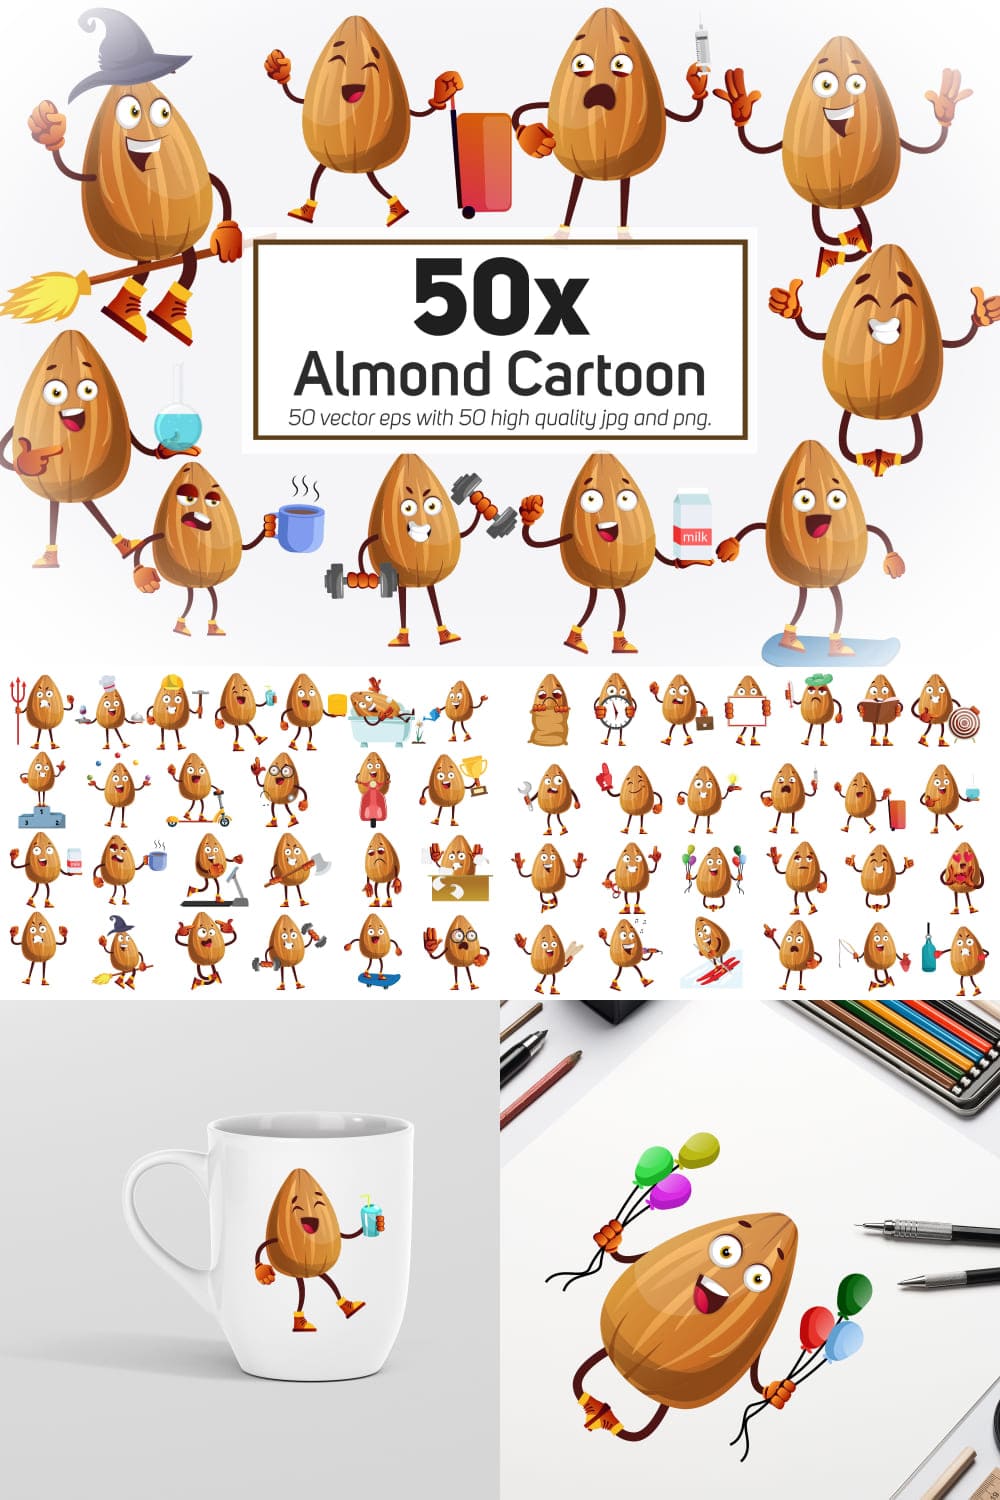 High-quality drawings of live almond grains.